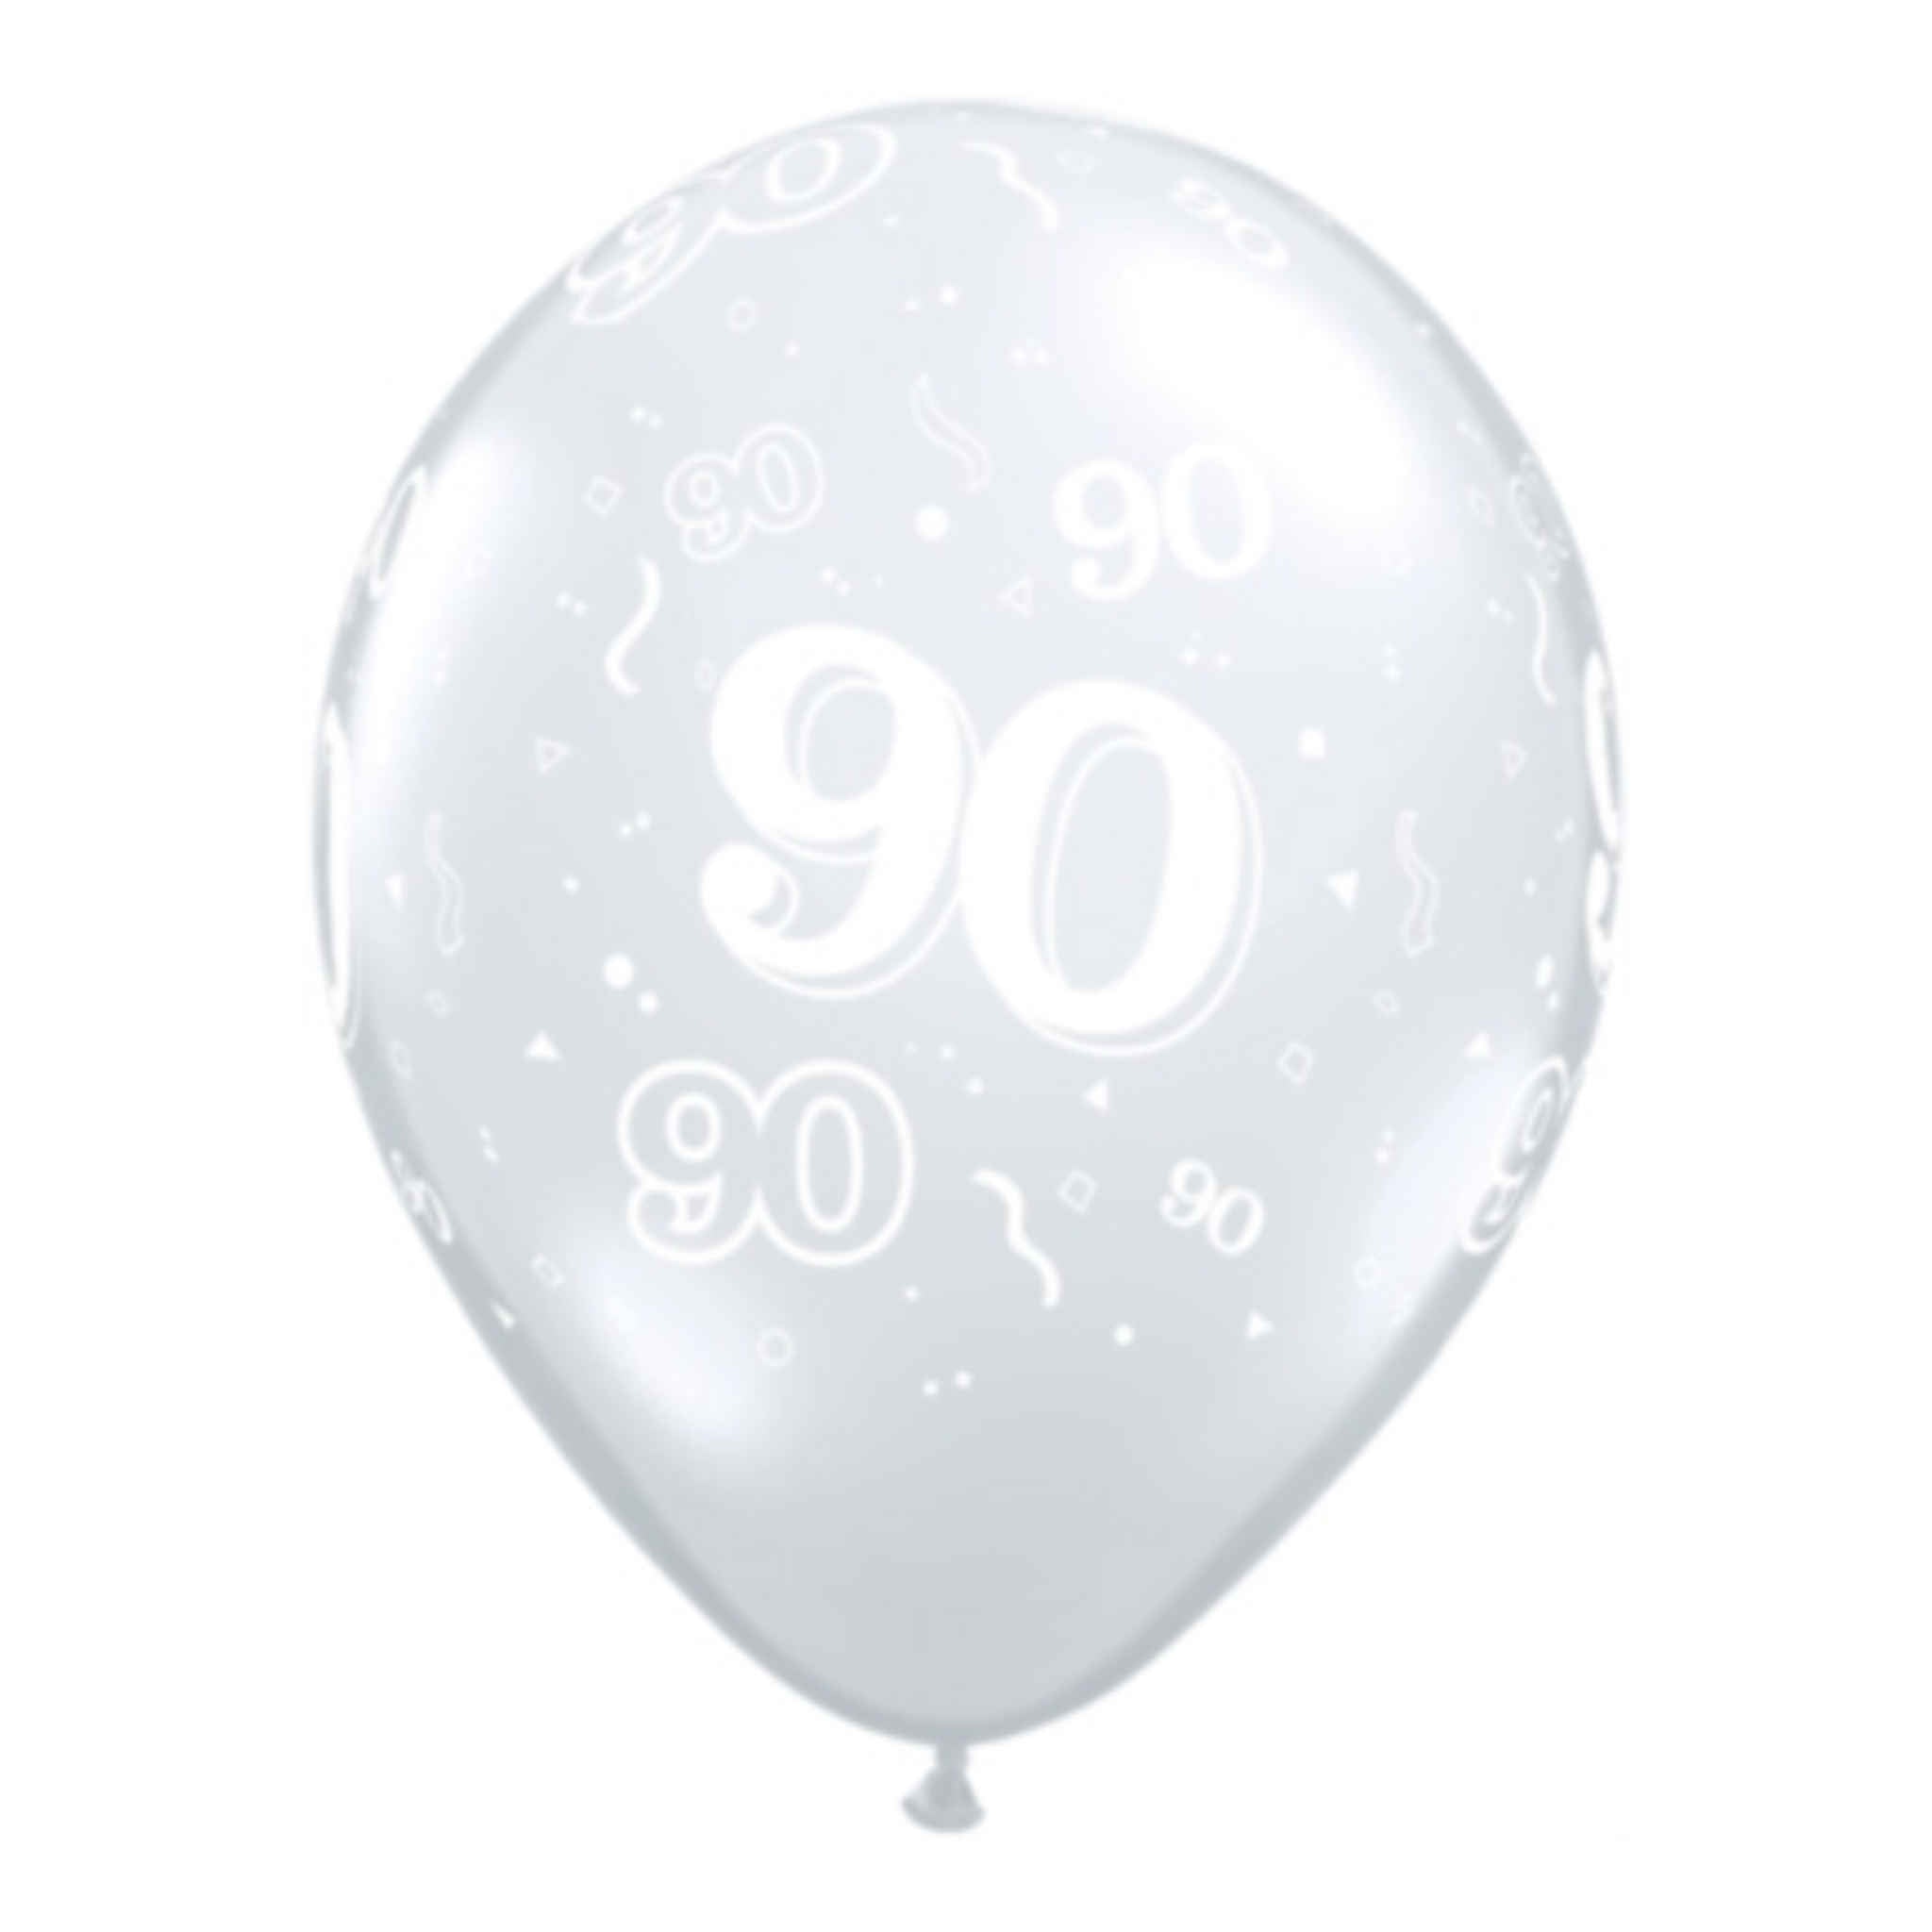 Round Balloons Crystal Clear 90th Birthday Polka Dots | 25 Pack | 12 inch